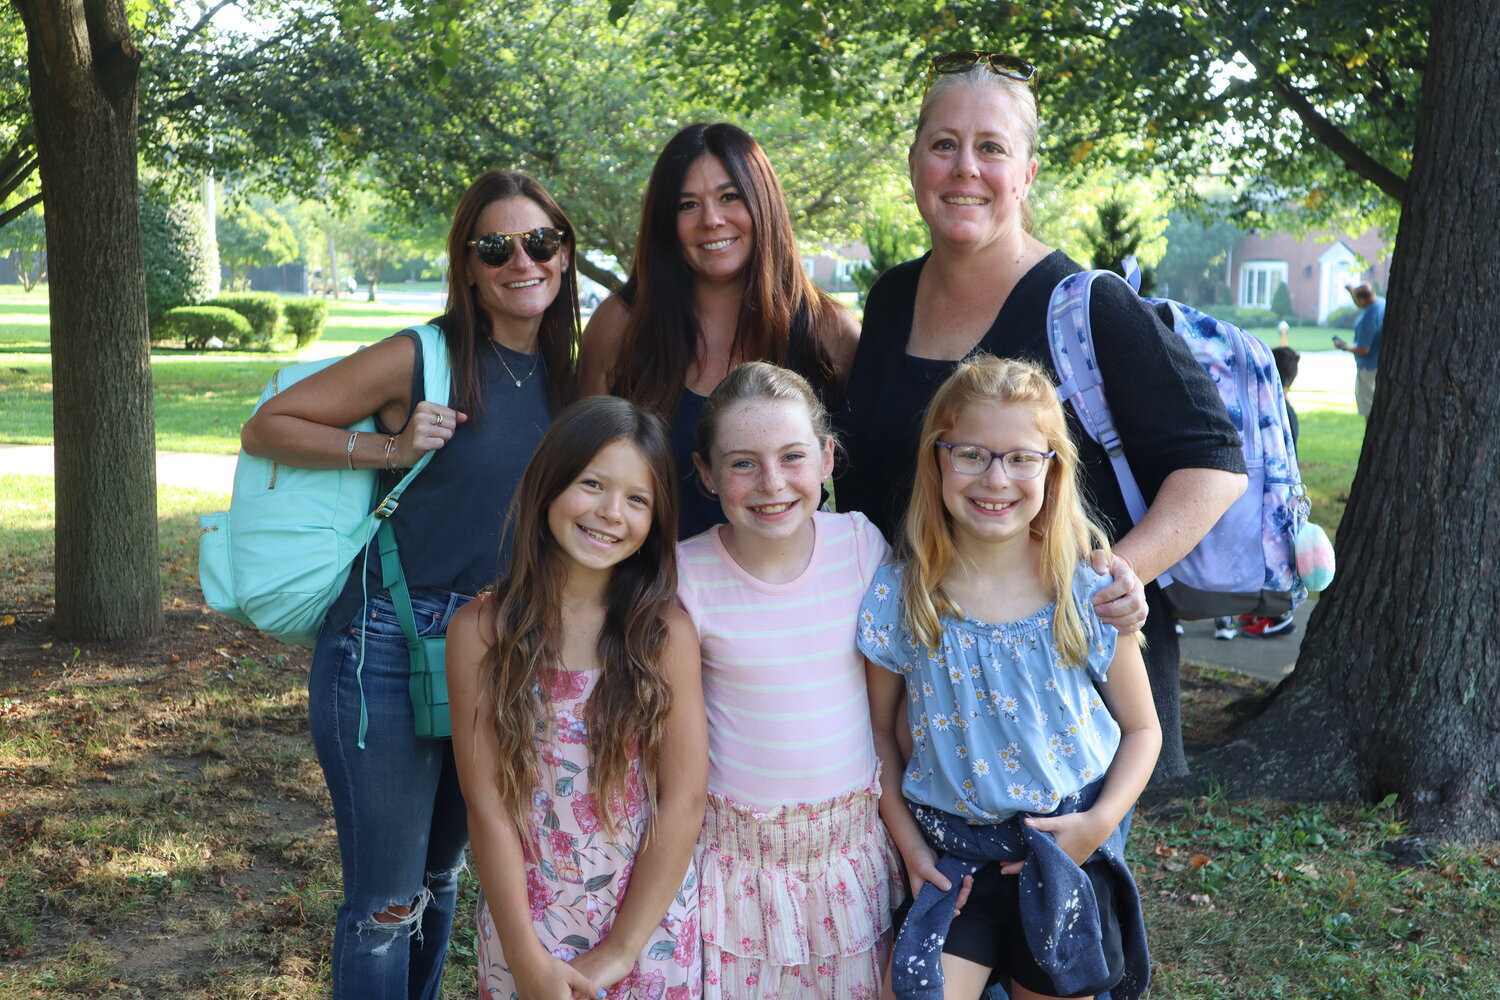 Emma Chatoff, Samantha Lally, Peyton Perna and their parents Jennifer, Stephanie and Randi are excited for the start of the 4th grade at Hewitt Elementary School.